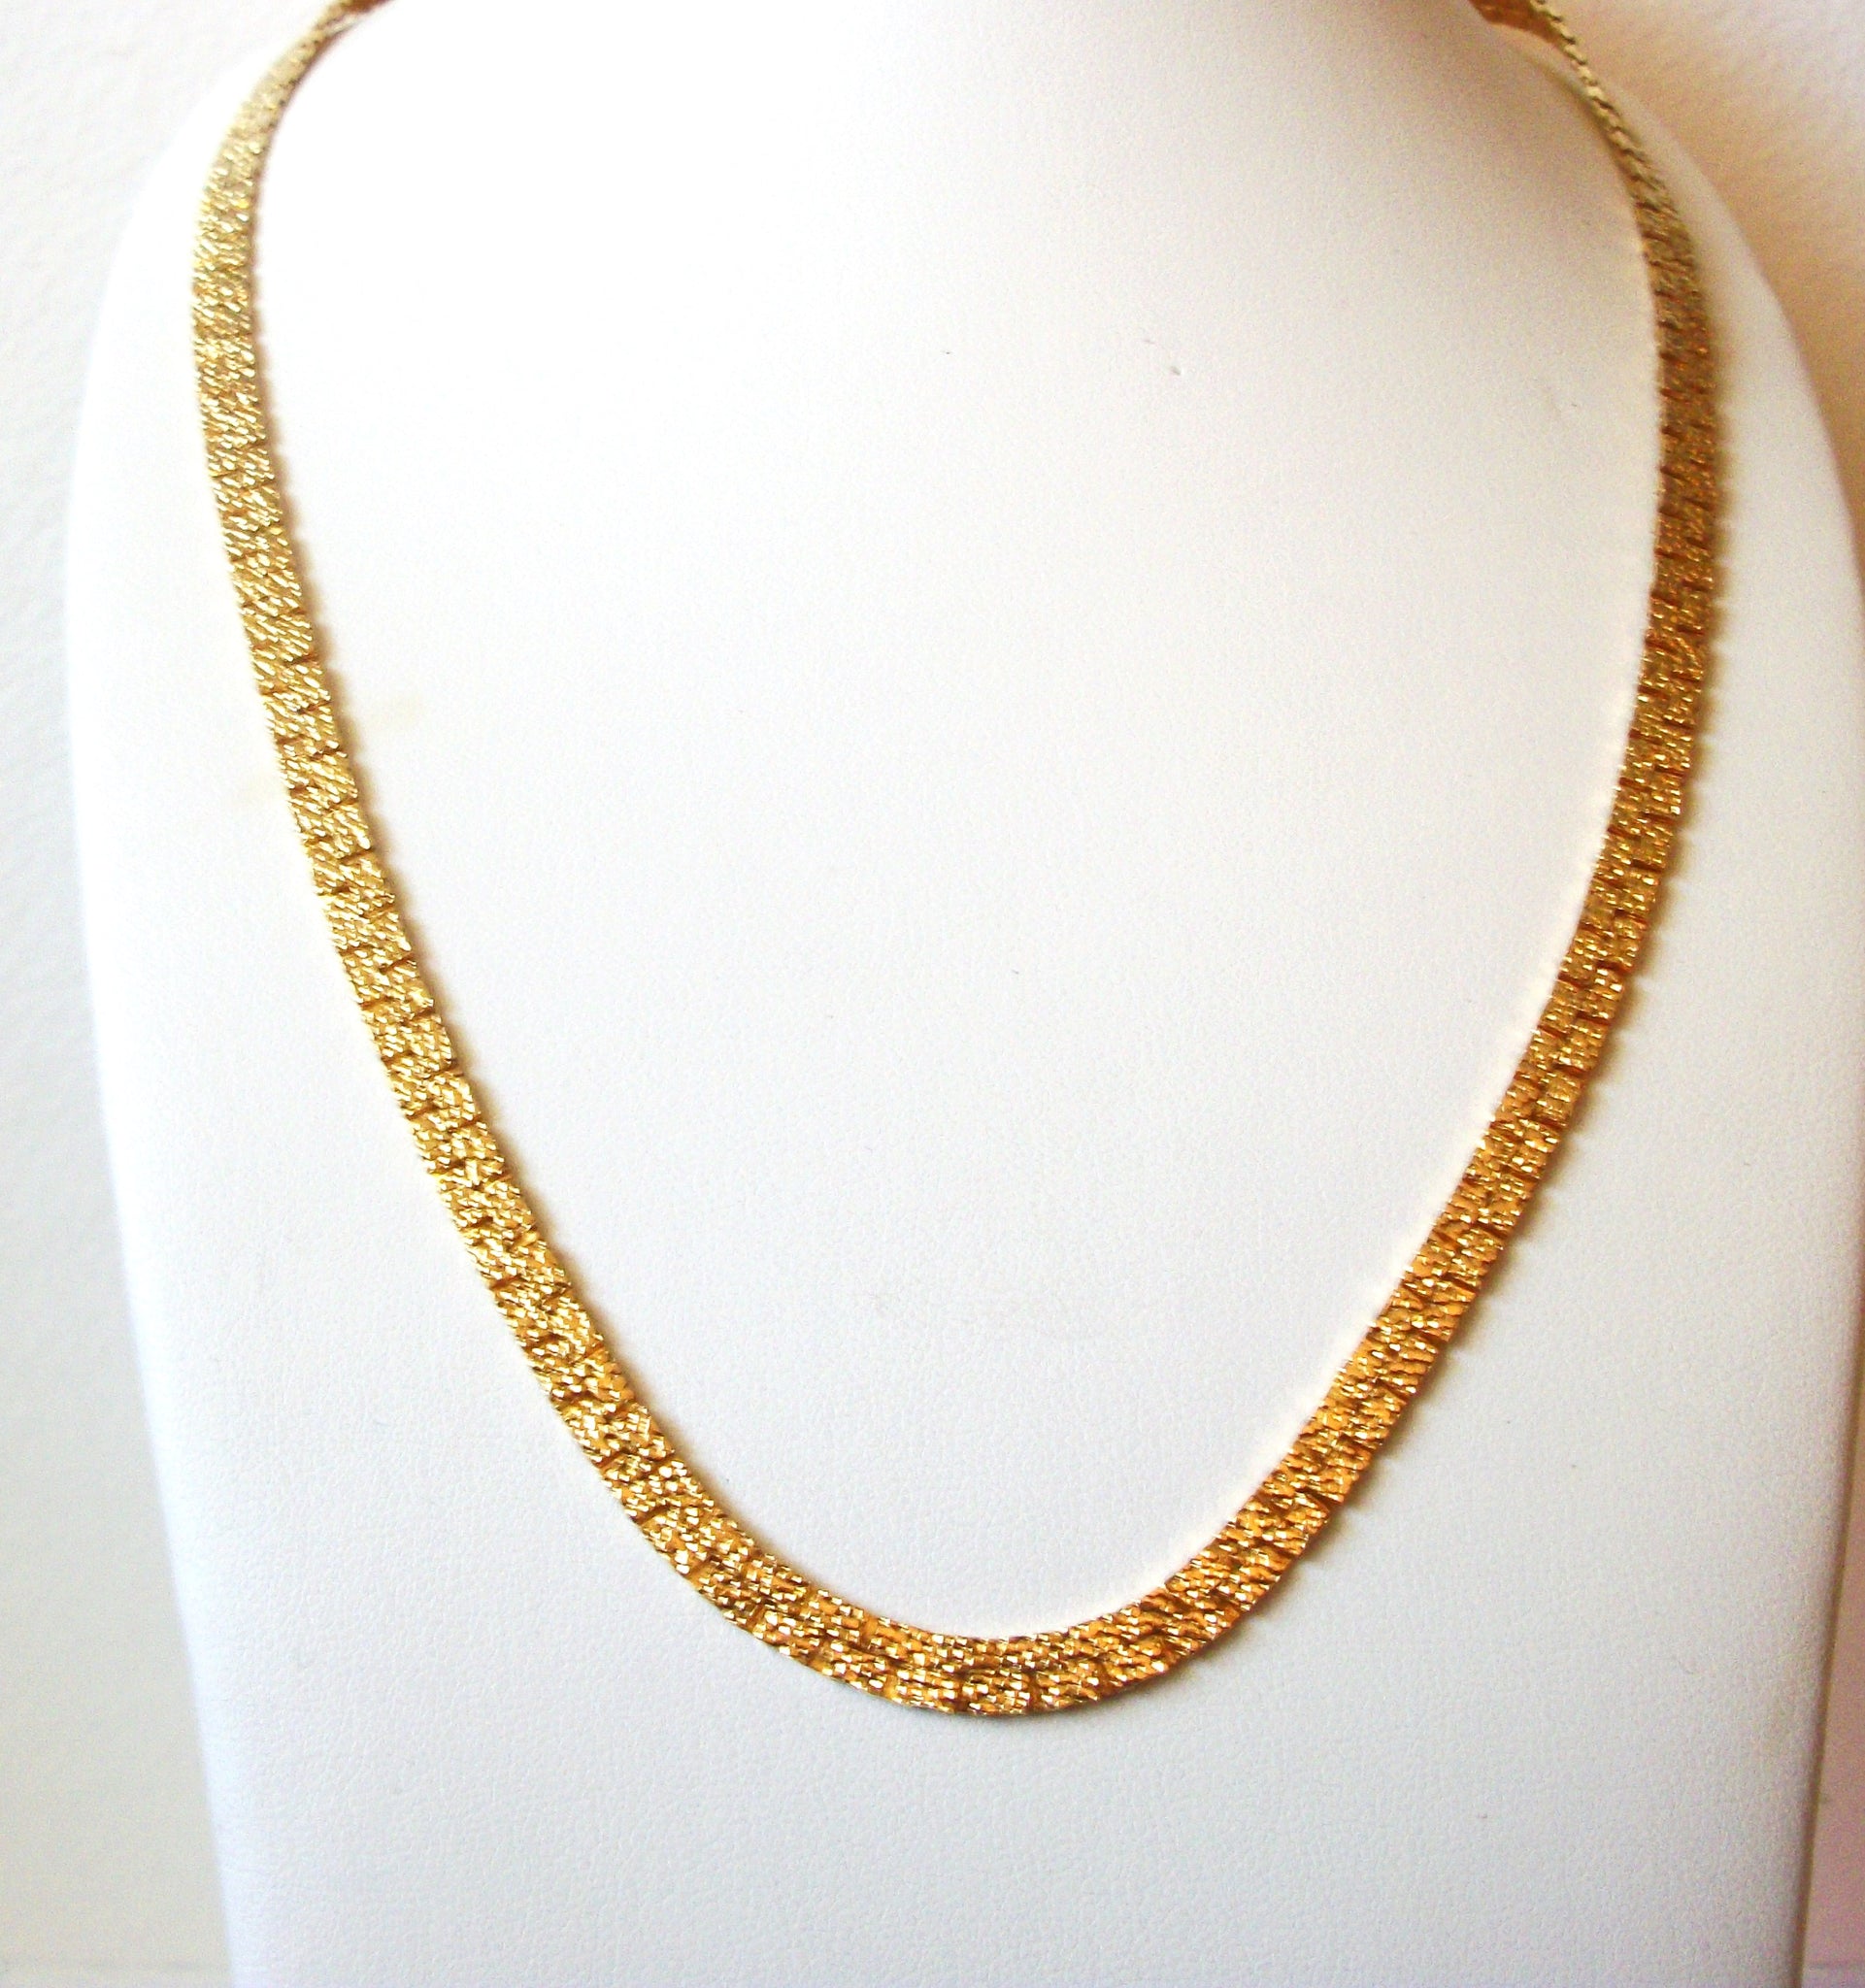 Vintage Gold Toned Chain 22" Necklace 5917